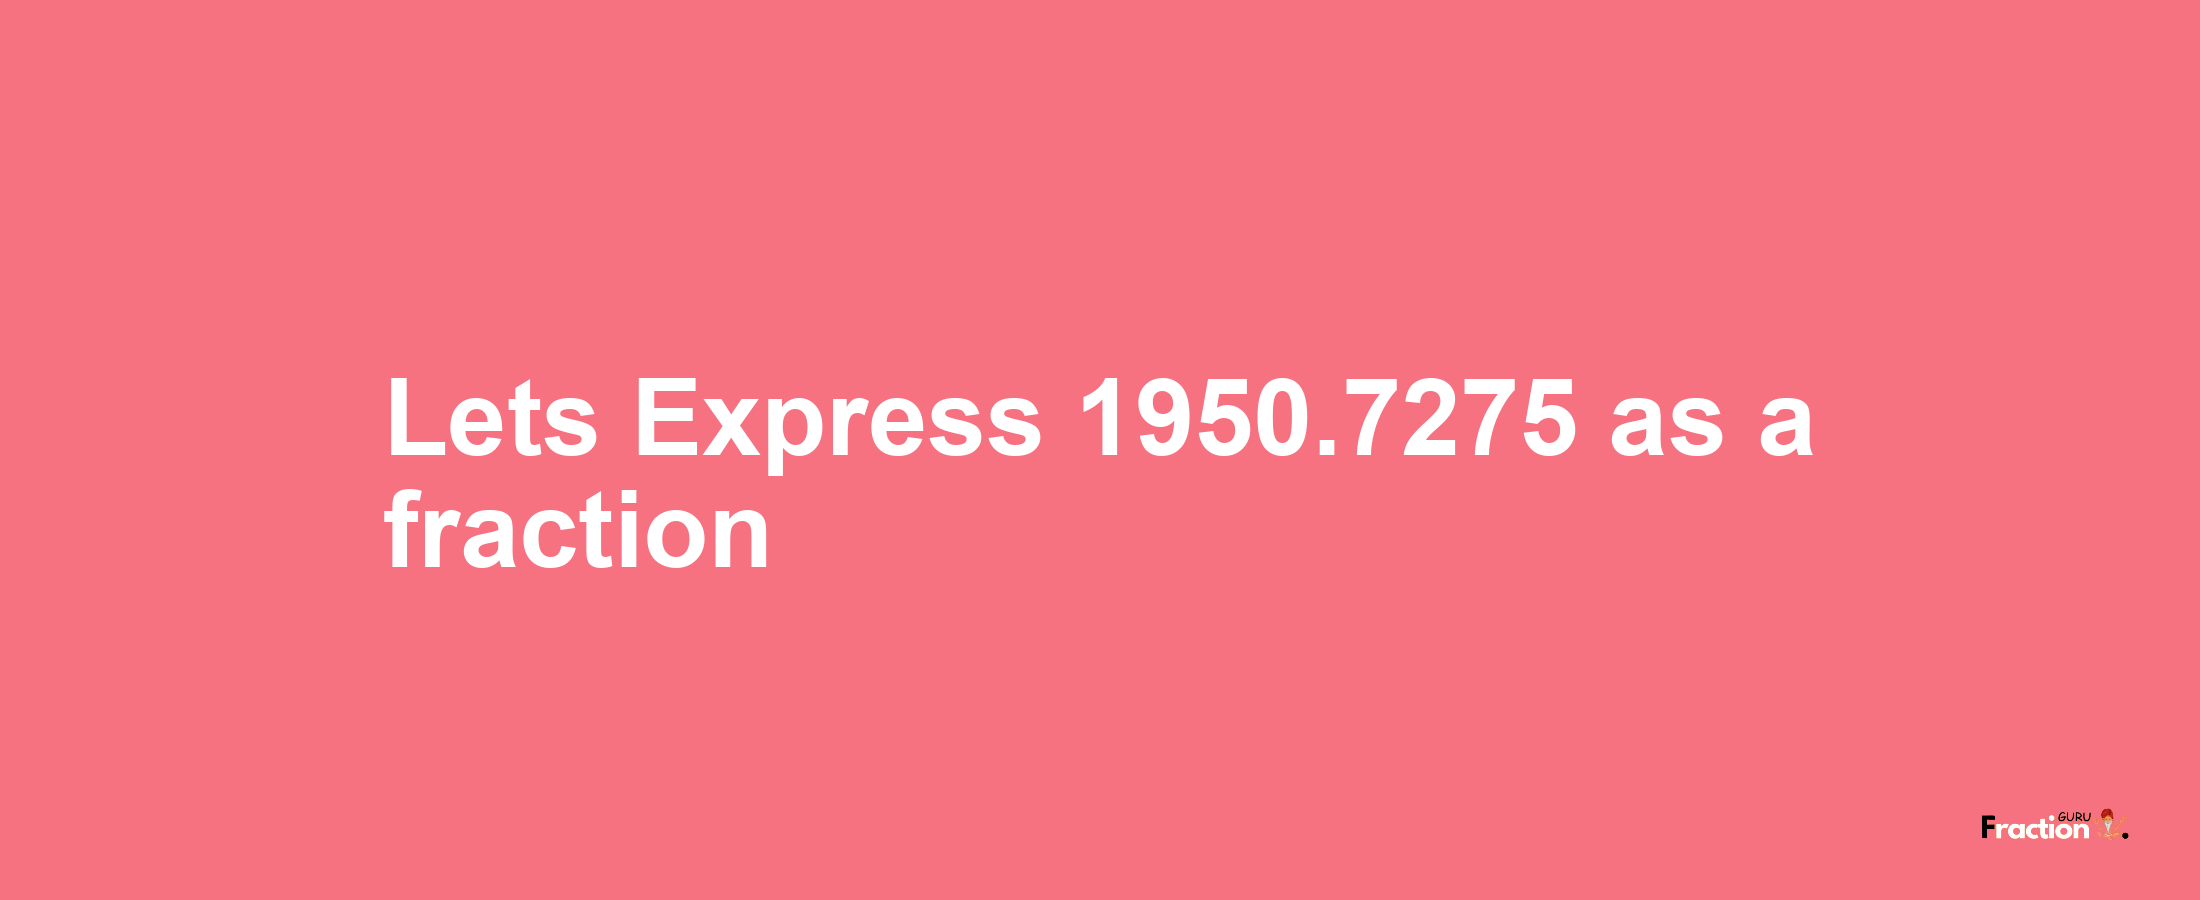 Lets Express 1950.7275 as afraction